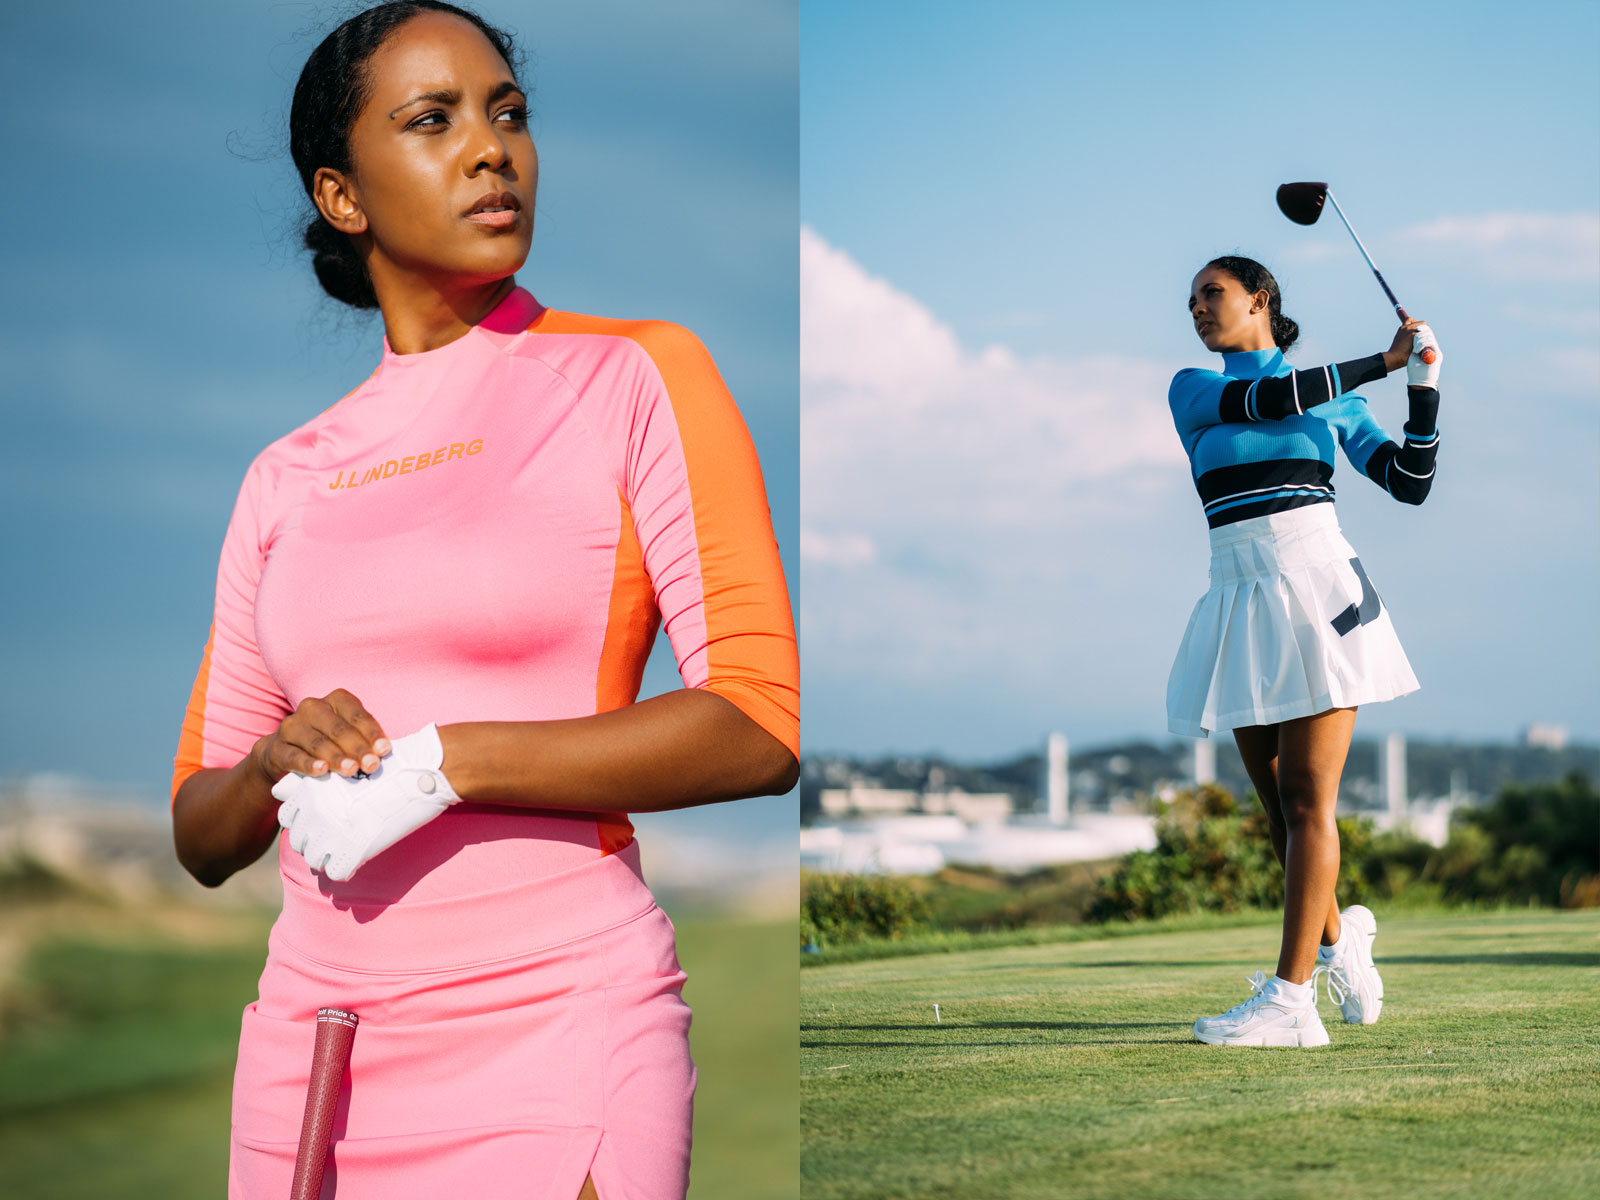 J Lindeberg Fall Winter 2020 Golf Collection 13